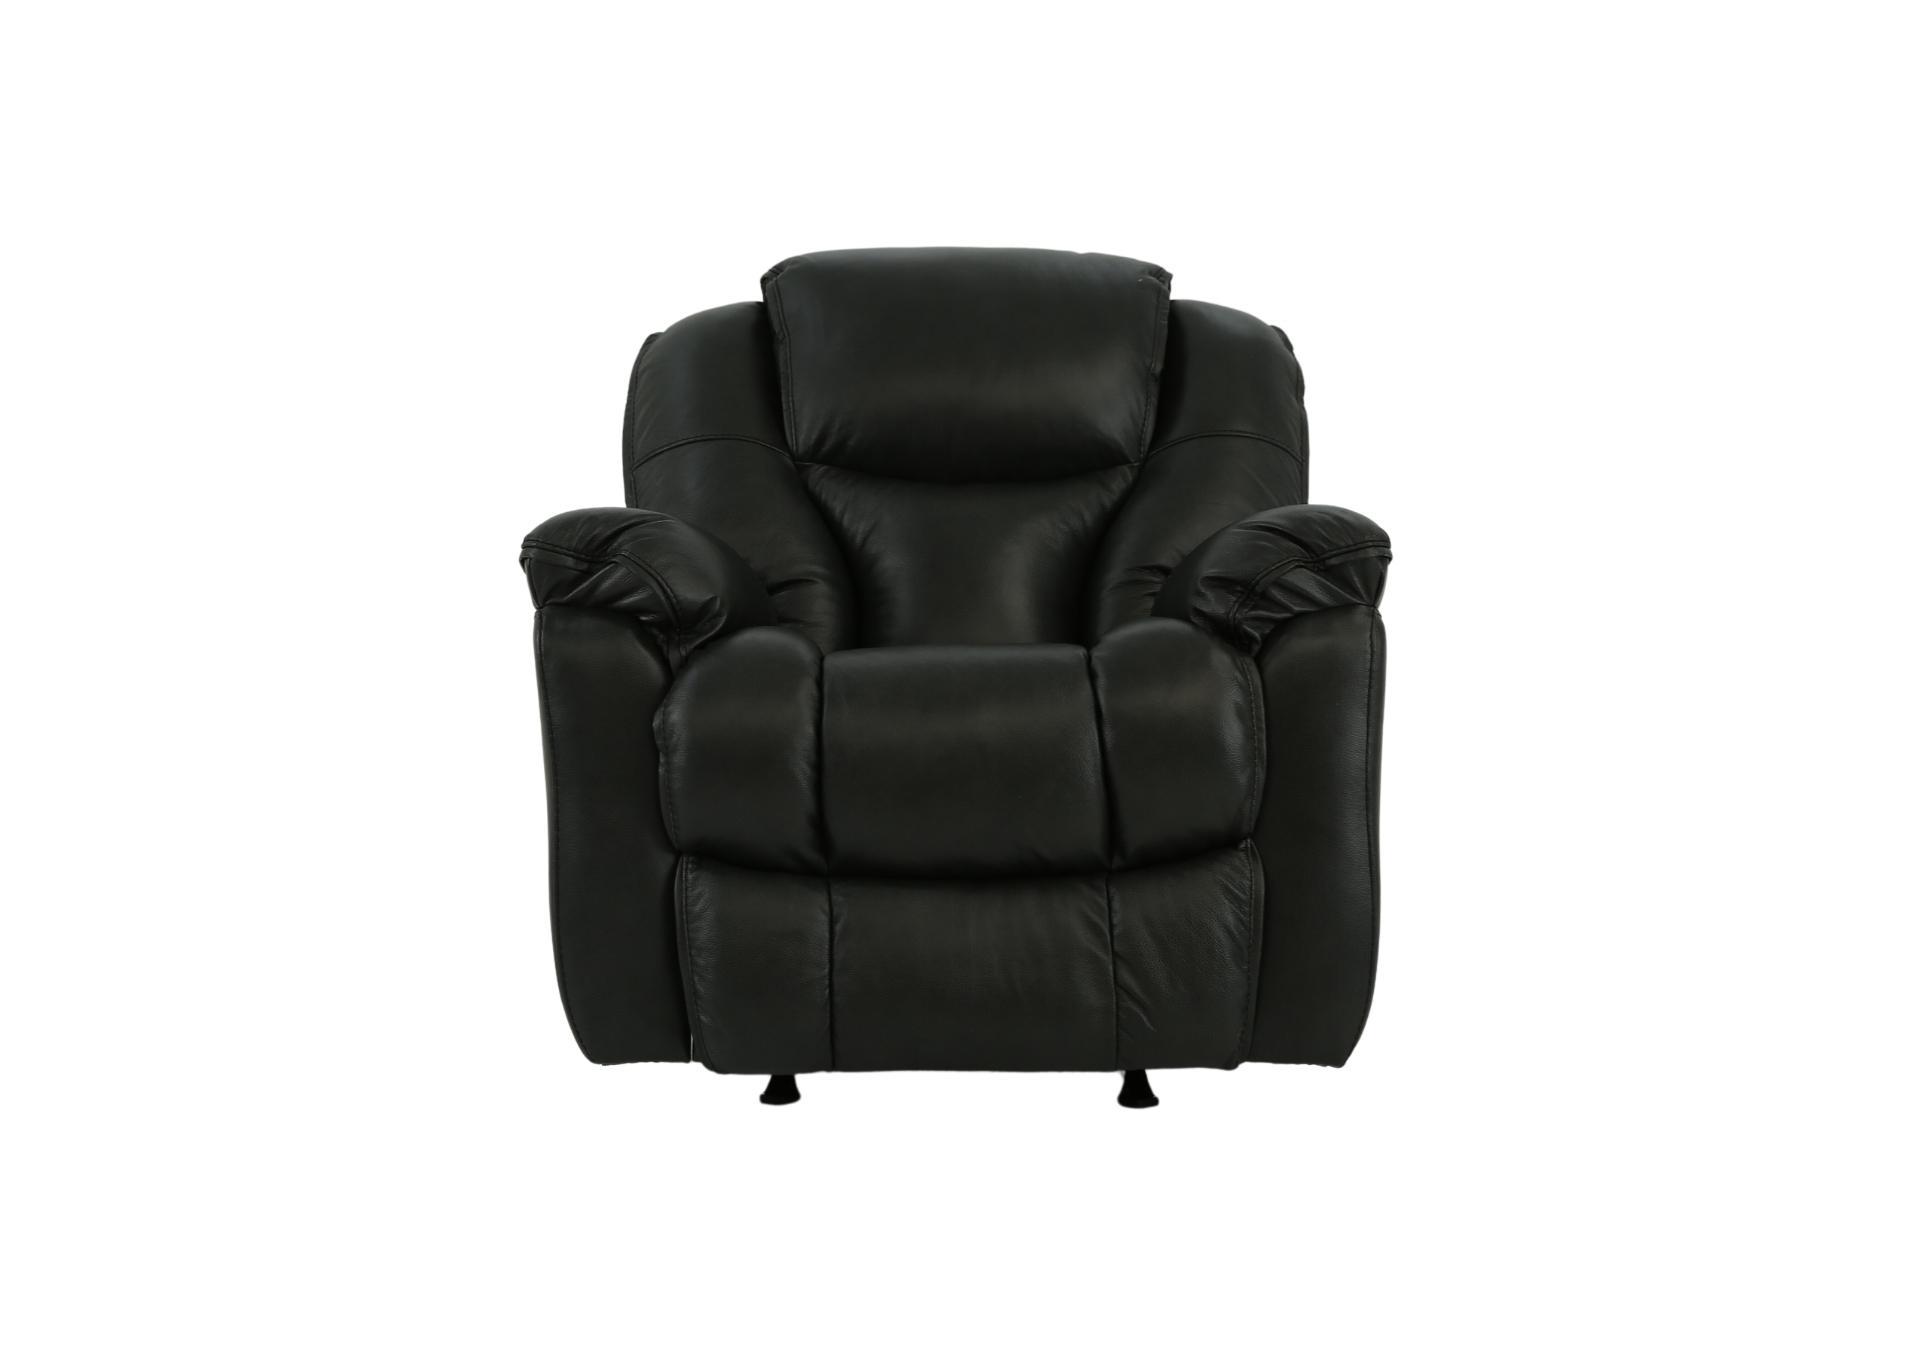 MUSTANG CHARCOAL LEATHER ROCKER RECLINER,HOMESTRETCH